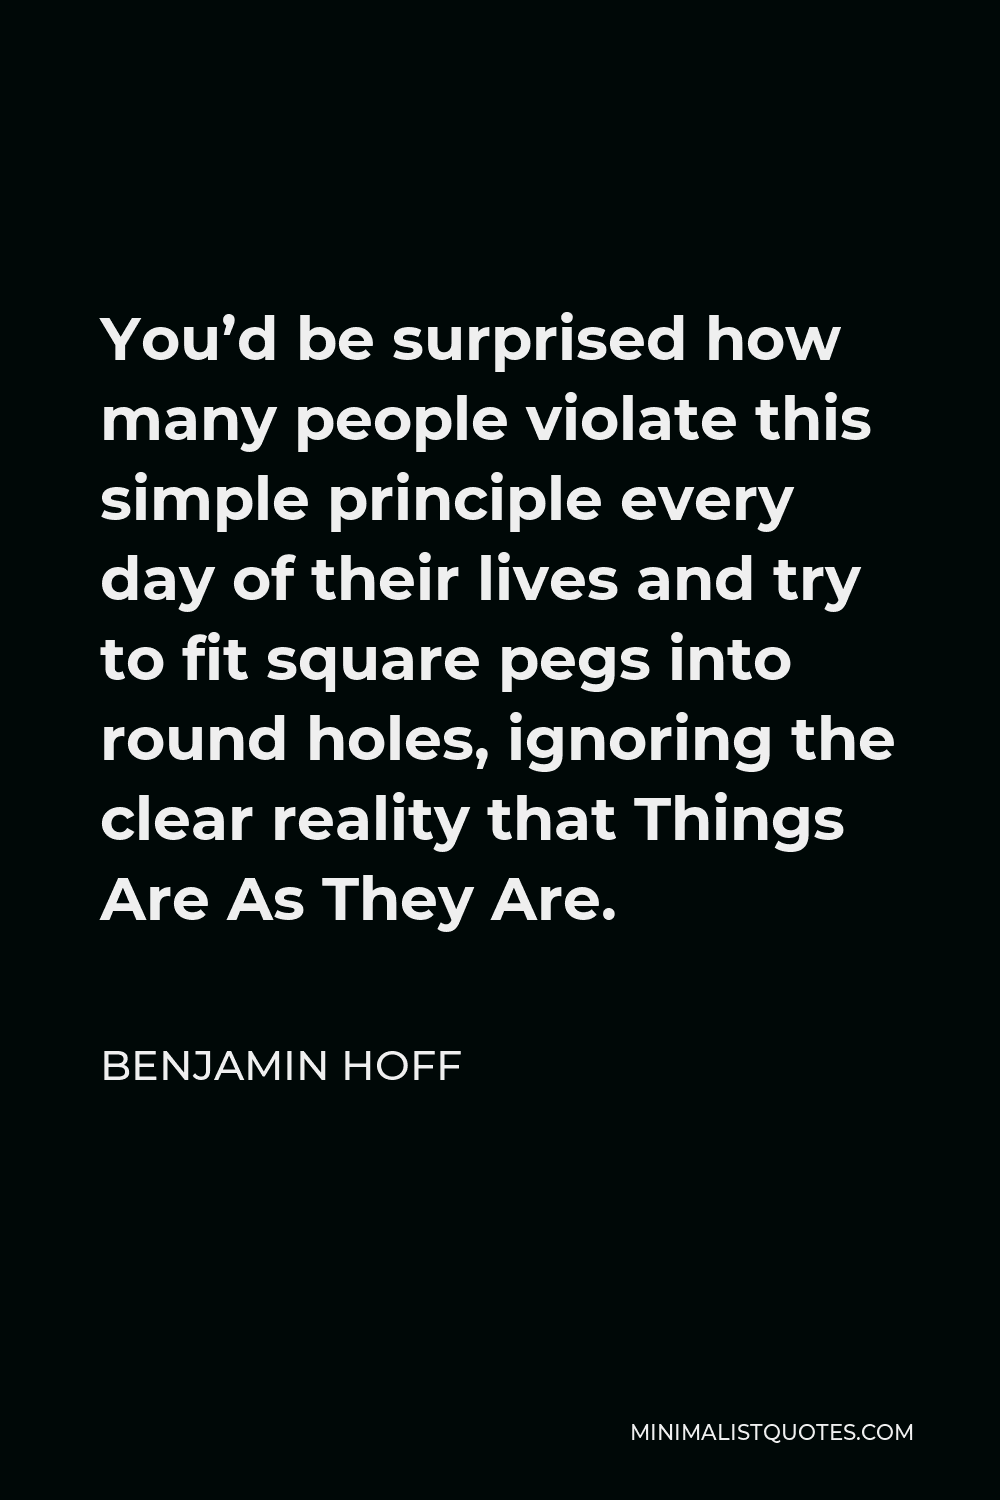 Benjamin Hoff Quote - You’d be surprised how many people violate this simple principle every day of their lives and try to fit square pegs into round holes, ignoring the clear reality that Things Are As They Are.